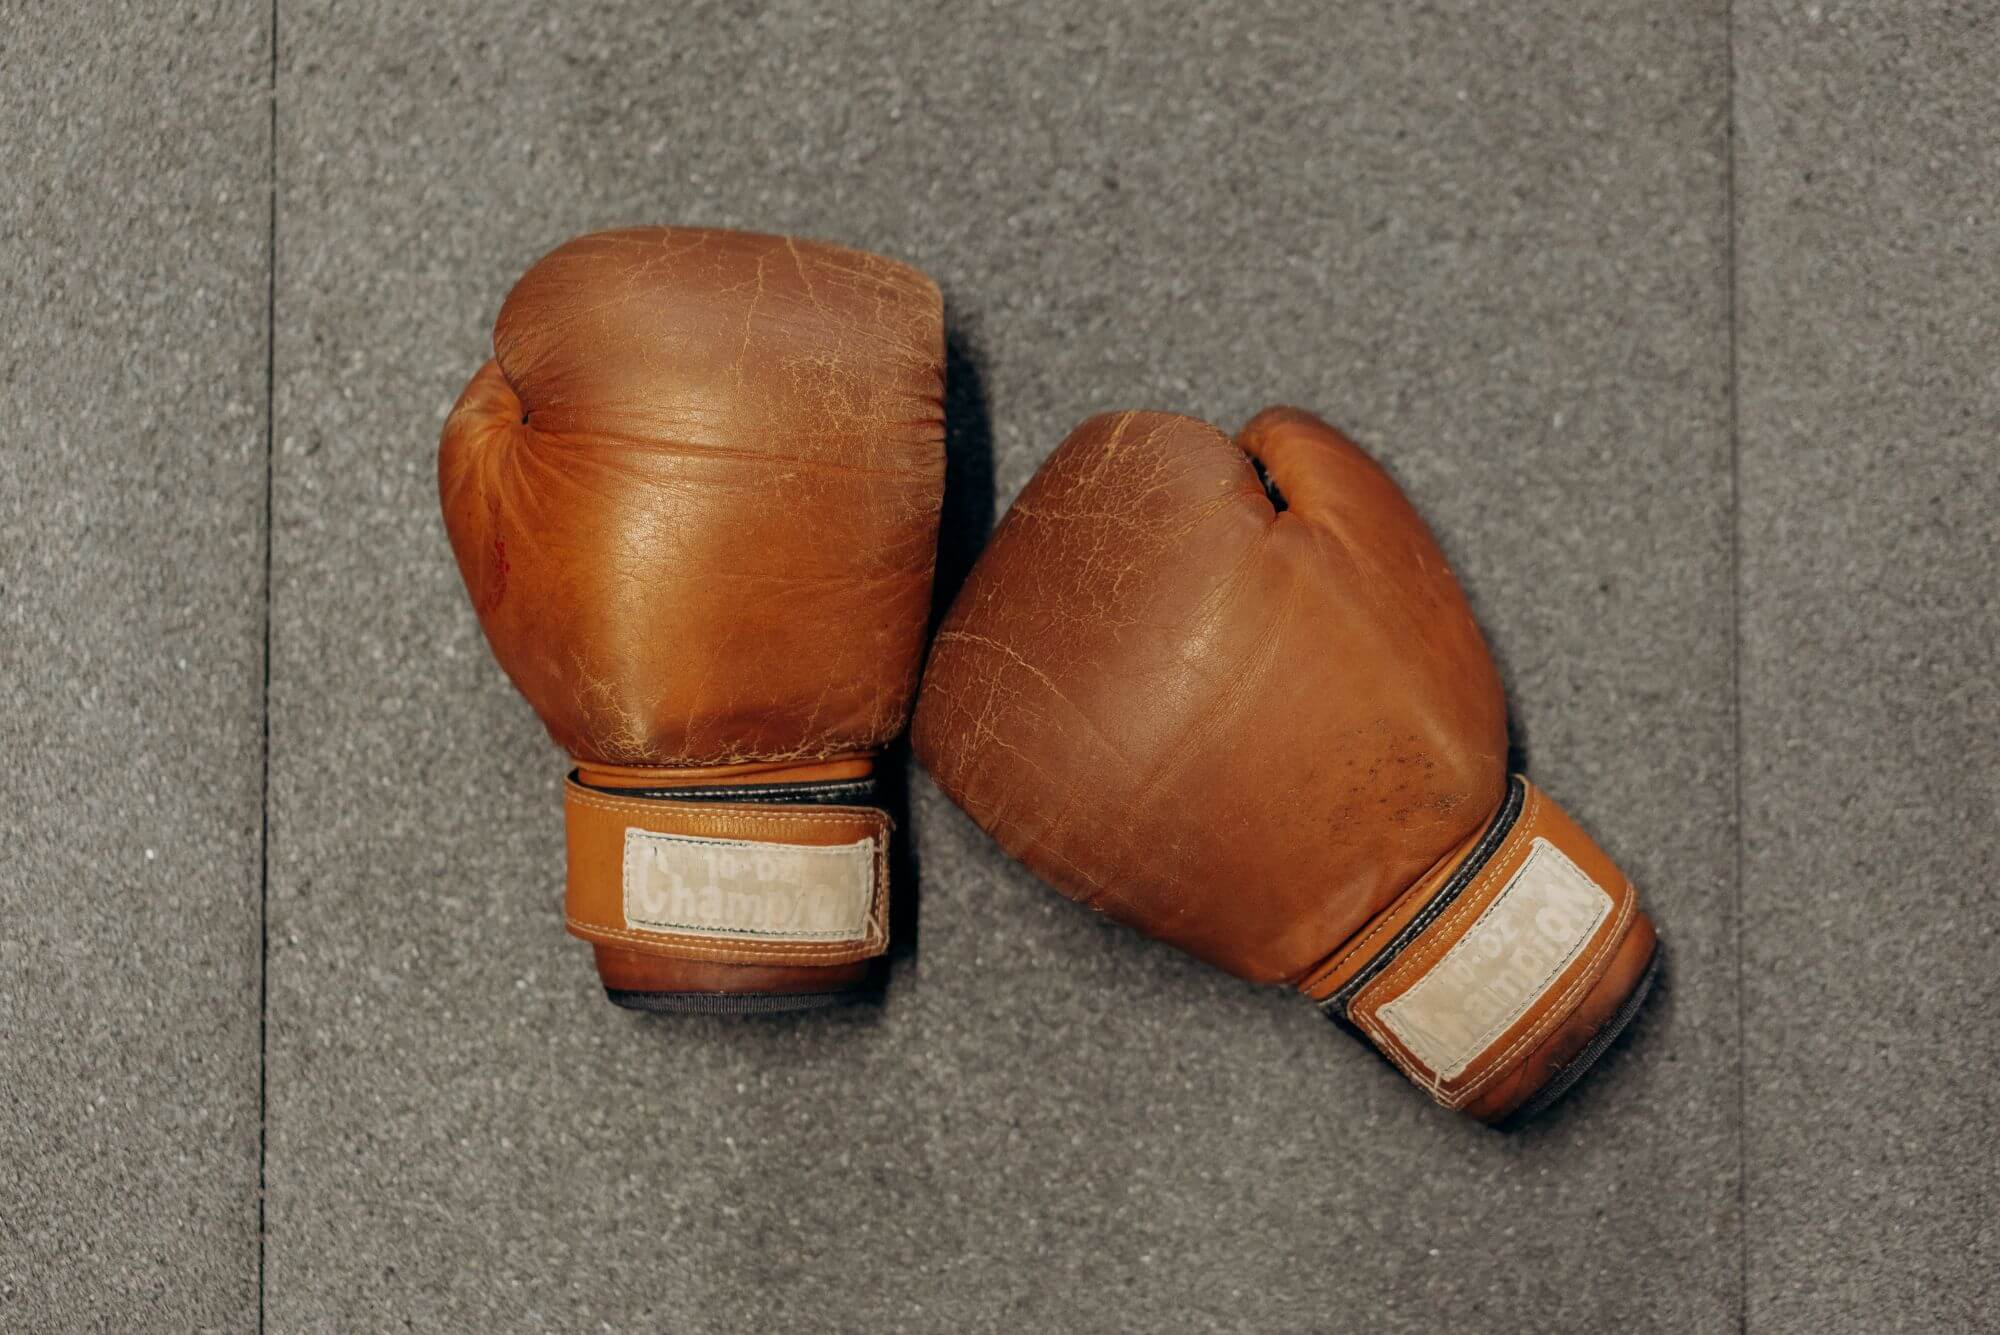 A pair of brown boxing gloves on grey background